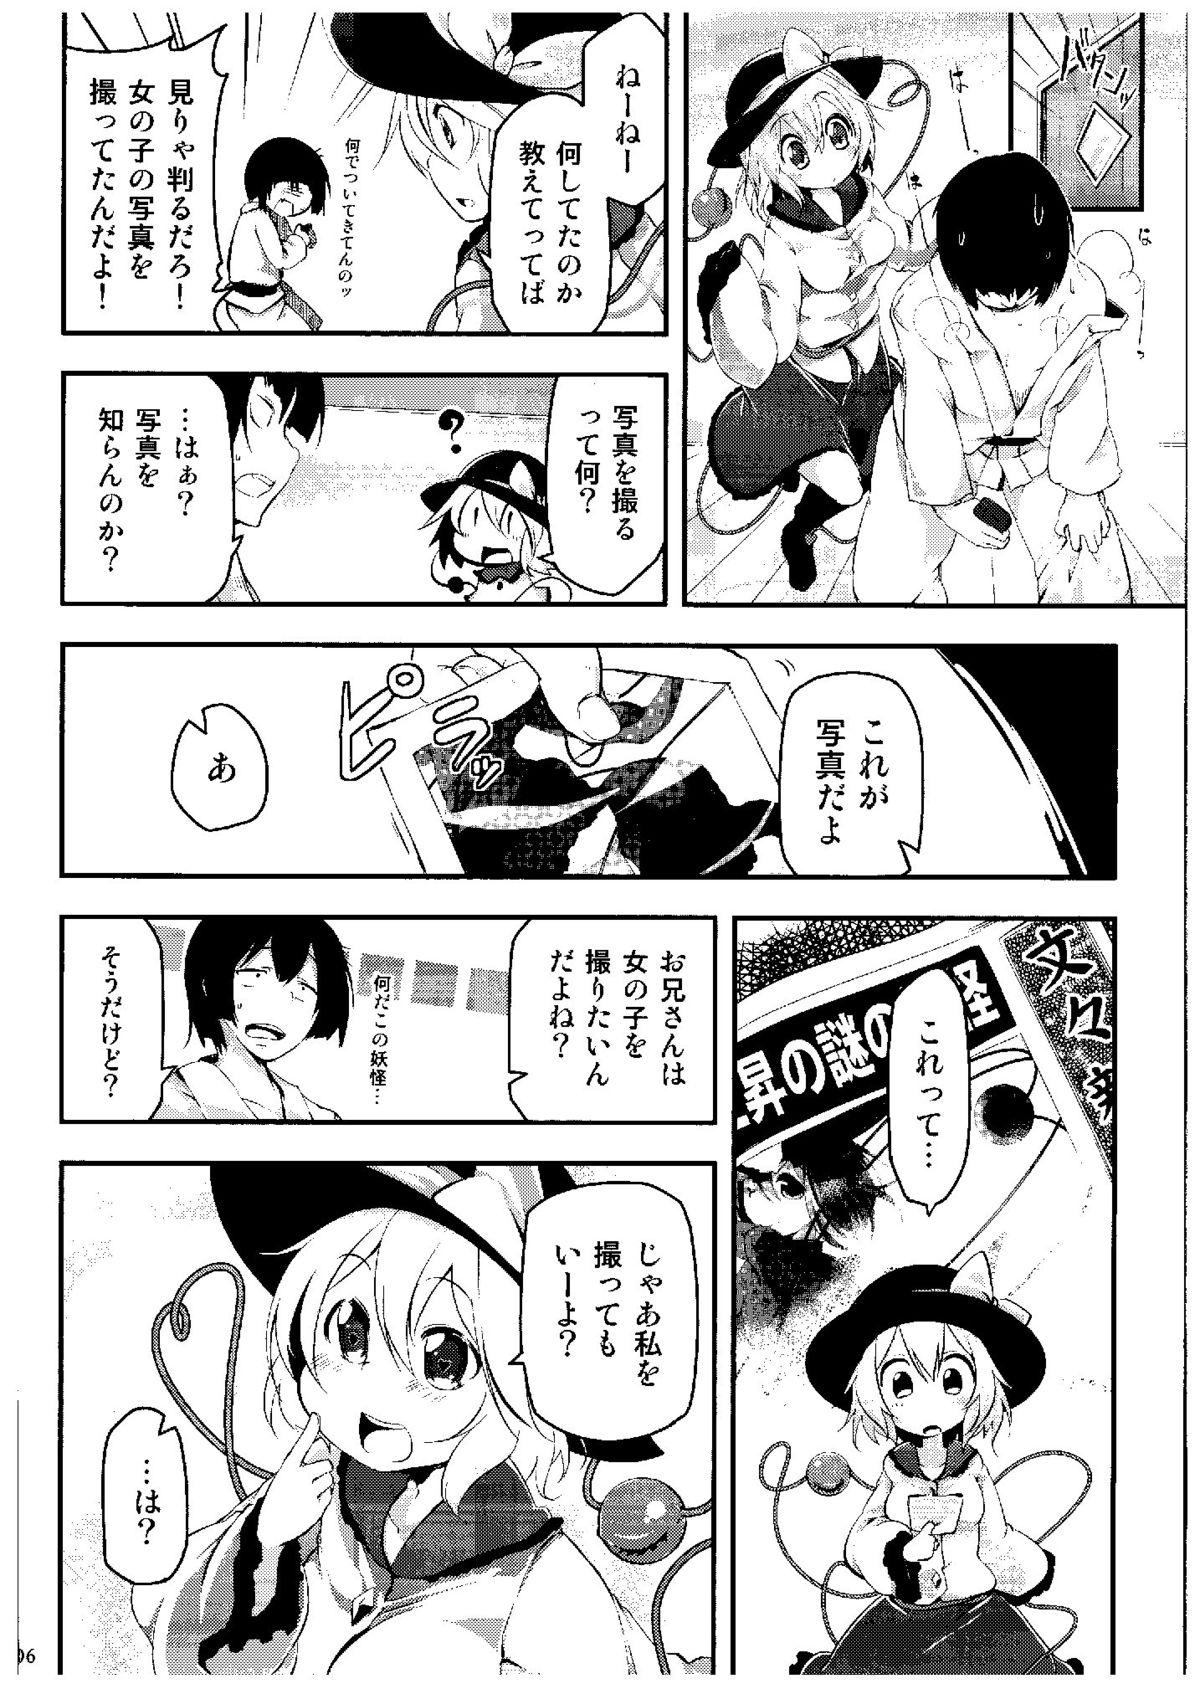 Relax Kite Mite Sawatte - Touhou project Shaven - Page 5